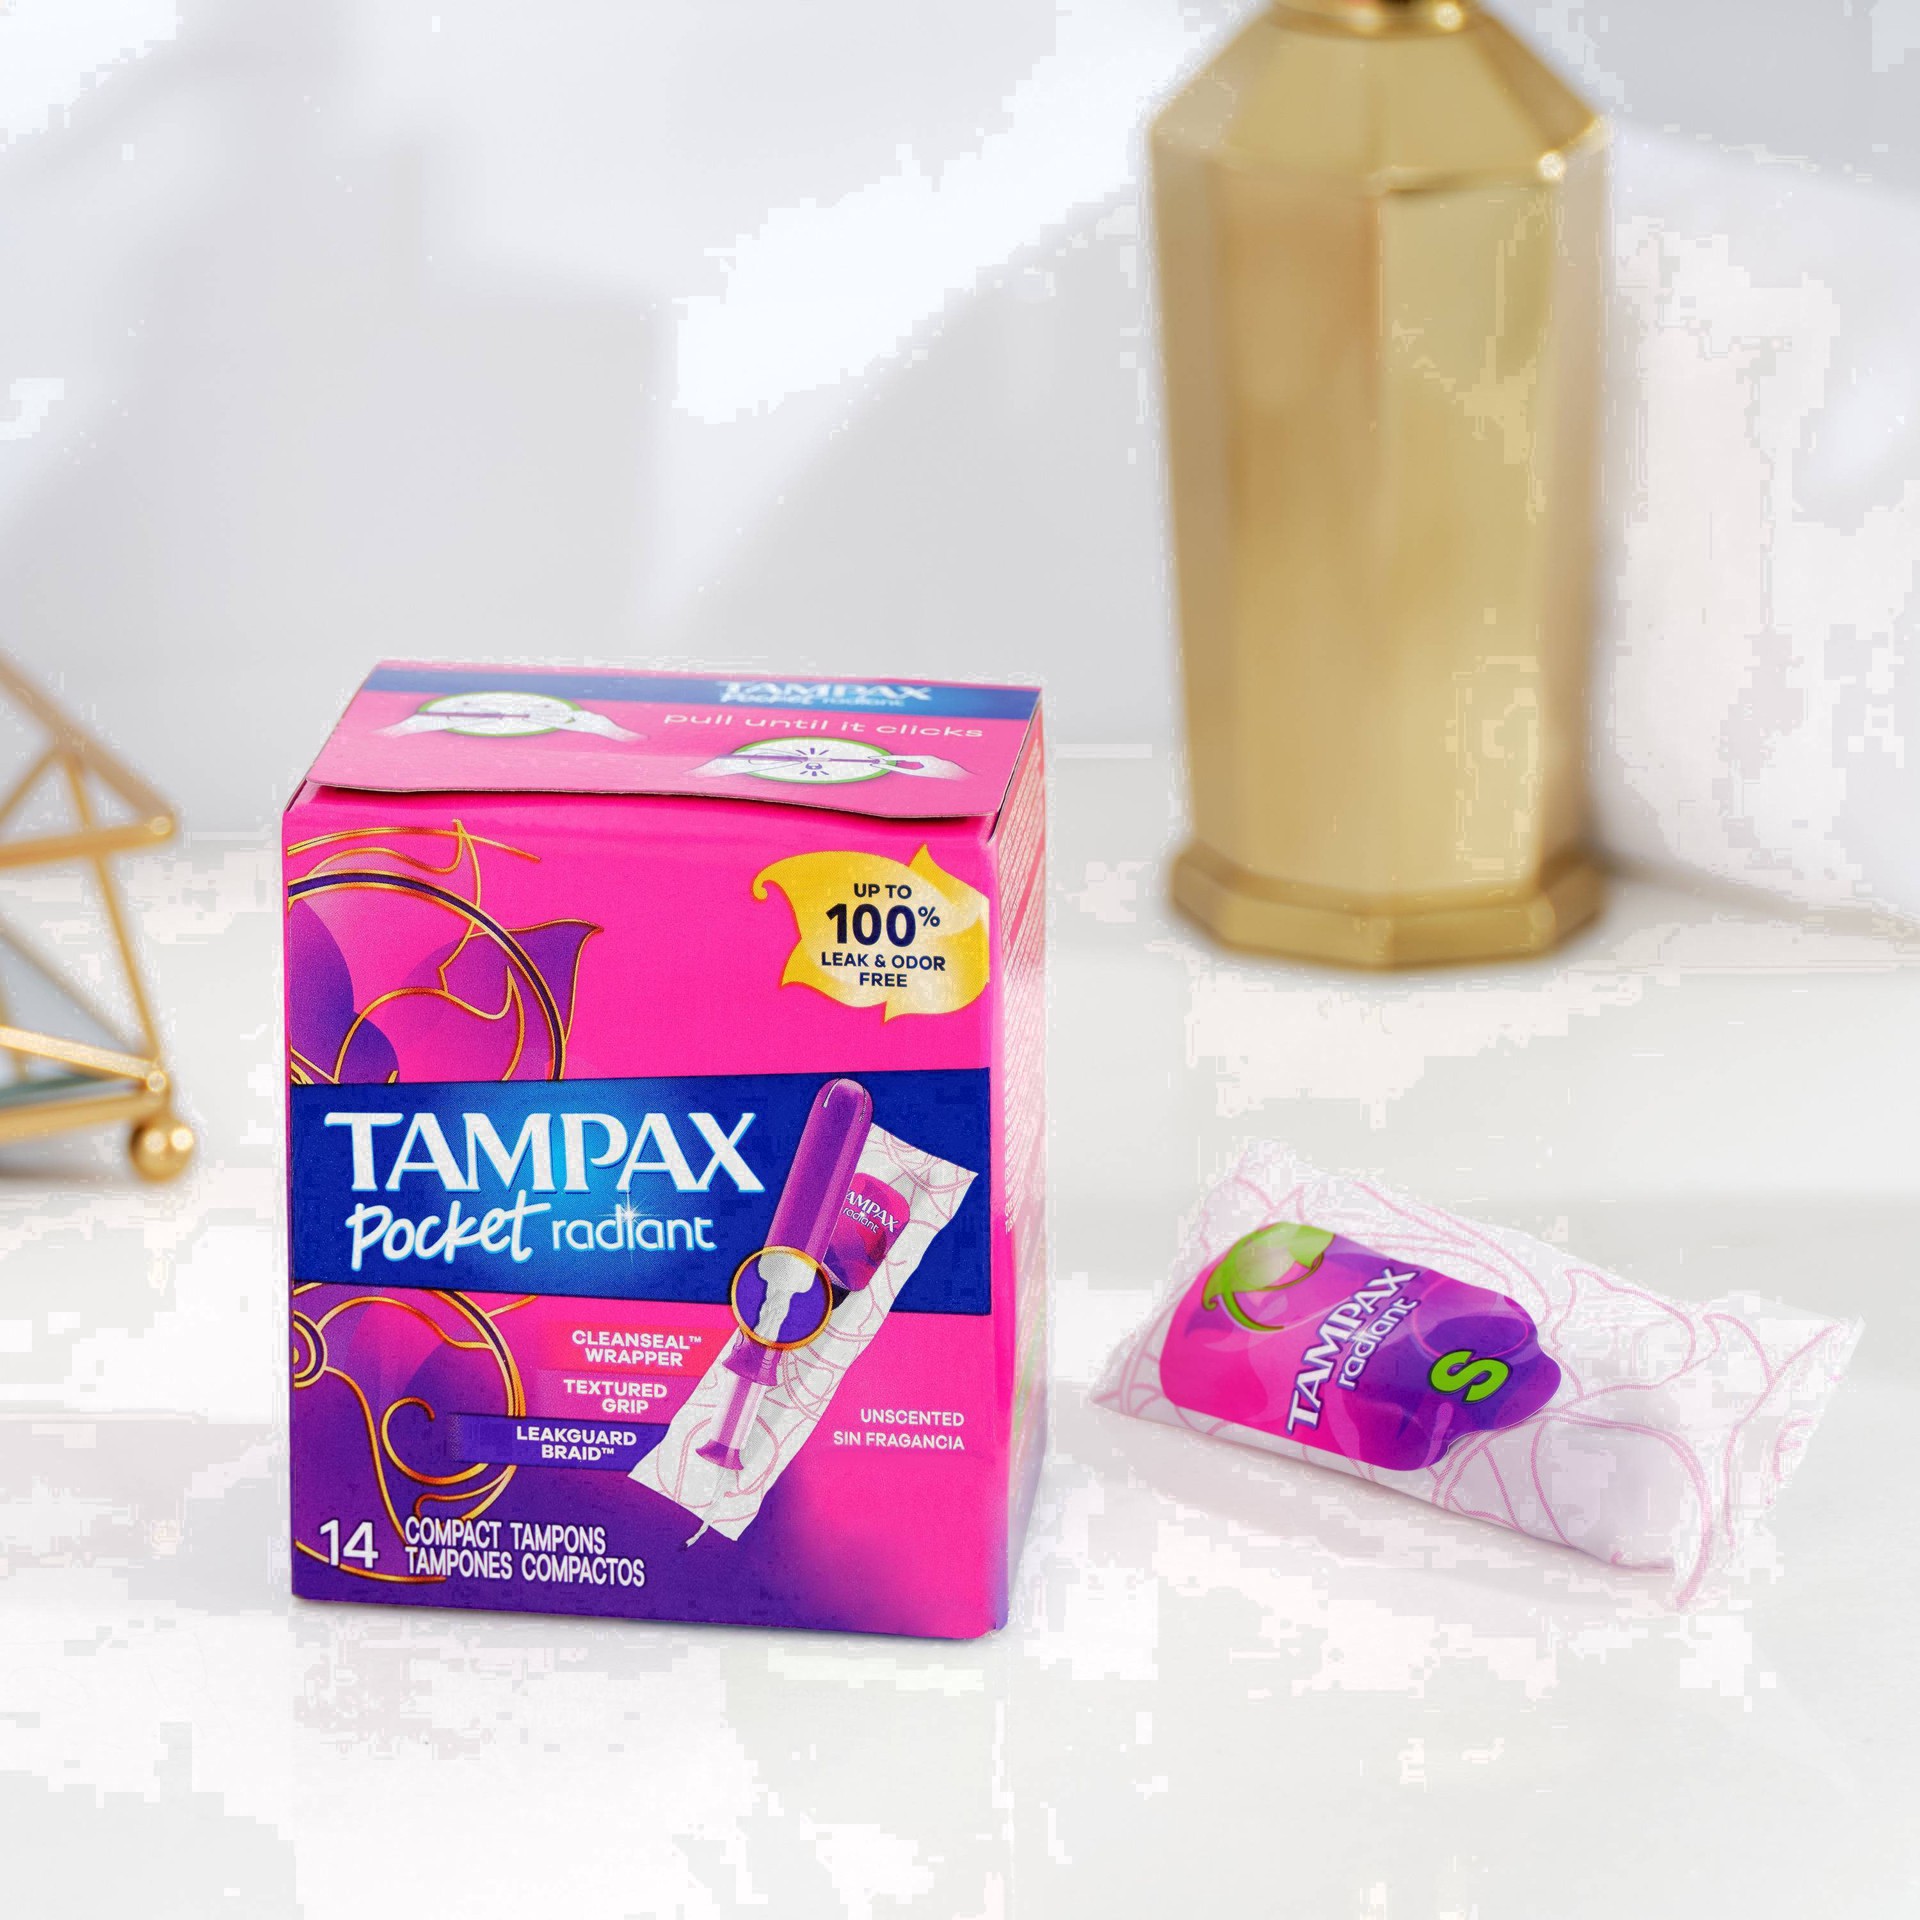 slide 10 of 94, Tampax Pocket Radiant Compact Plastic Tampons, With LeakGuard Braid, Super Absorbency, Unscented, 28 Count, 28 ct